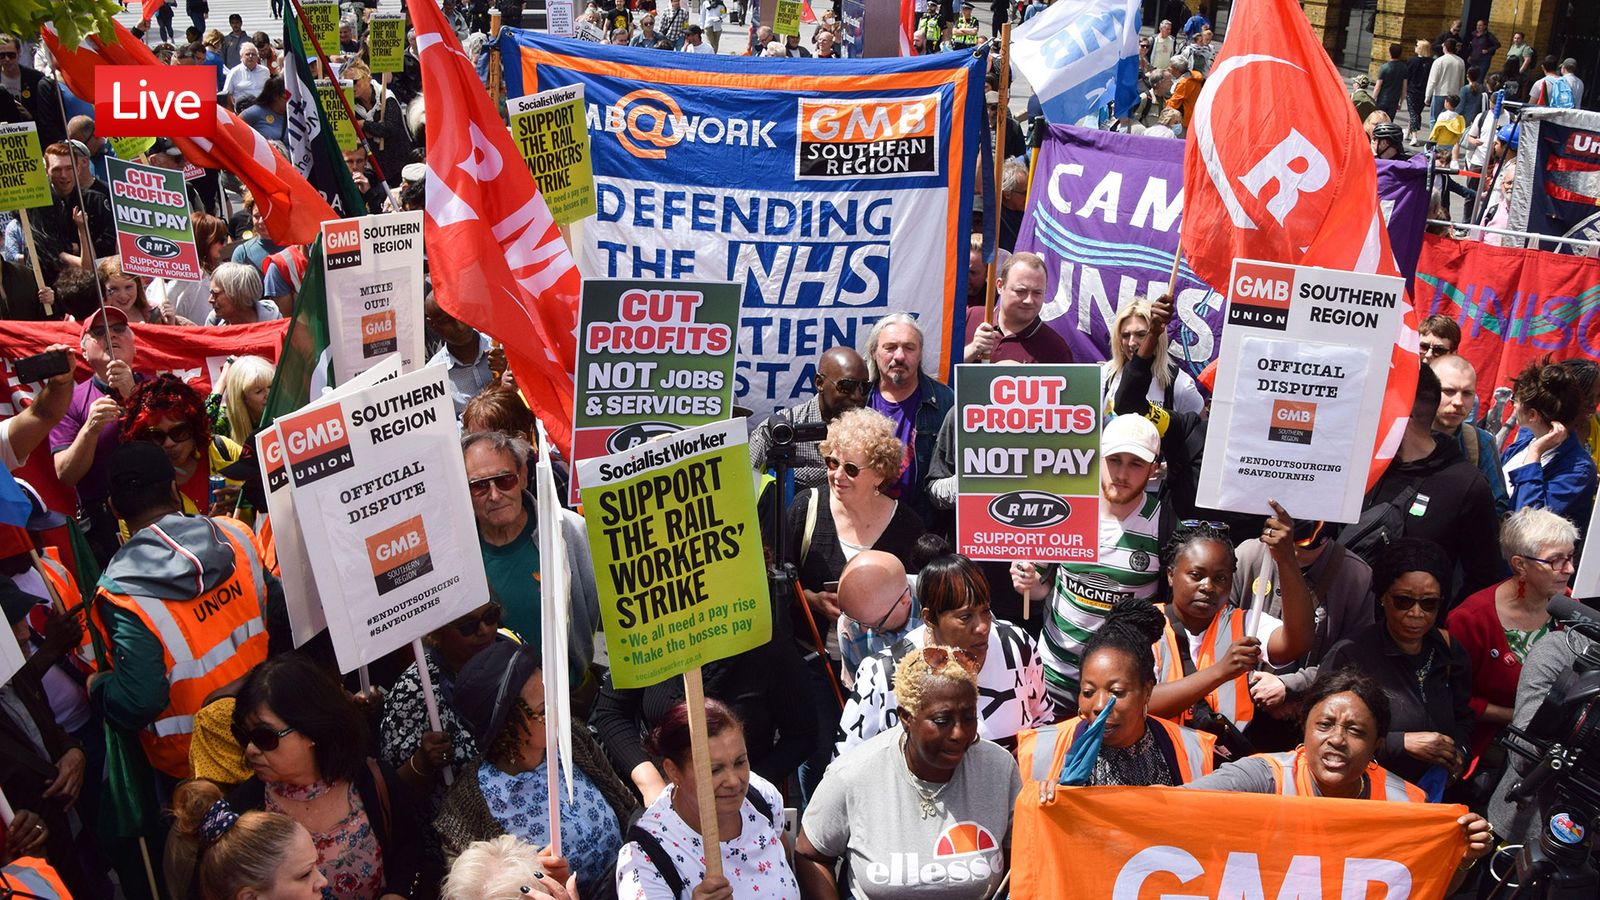 Unions could coordinate strike action across NHS for 'maximum impact', GMB boss says